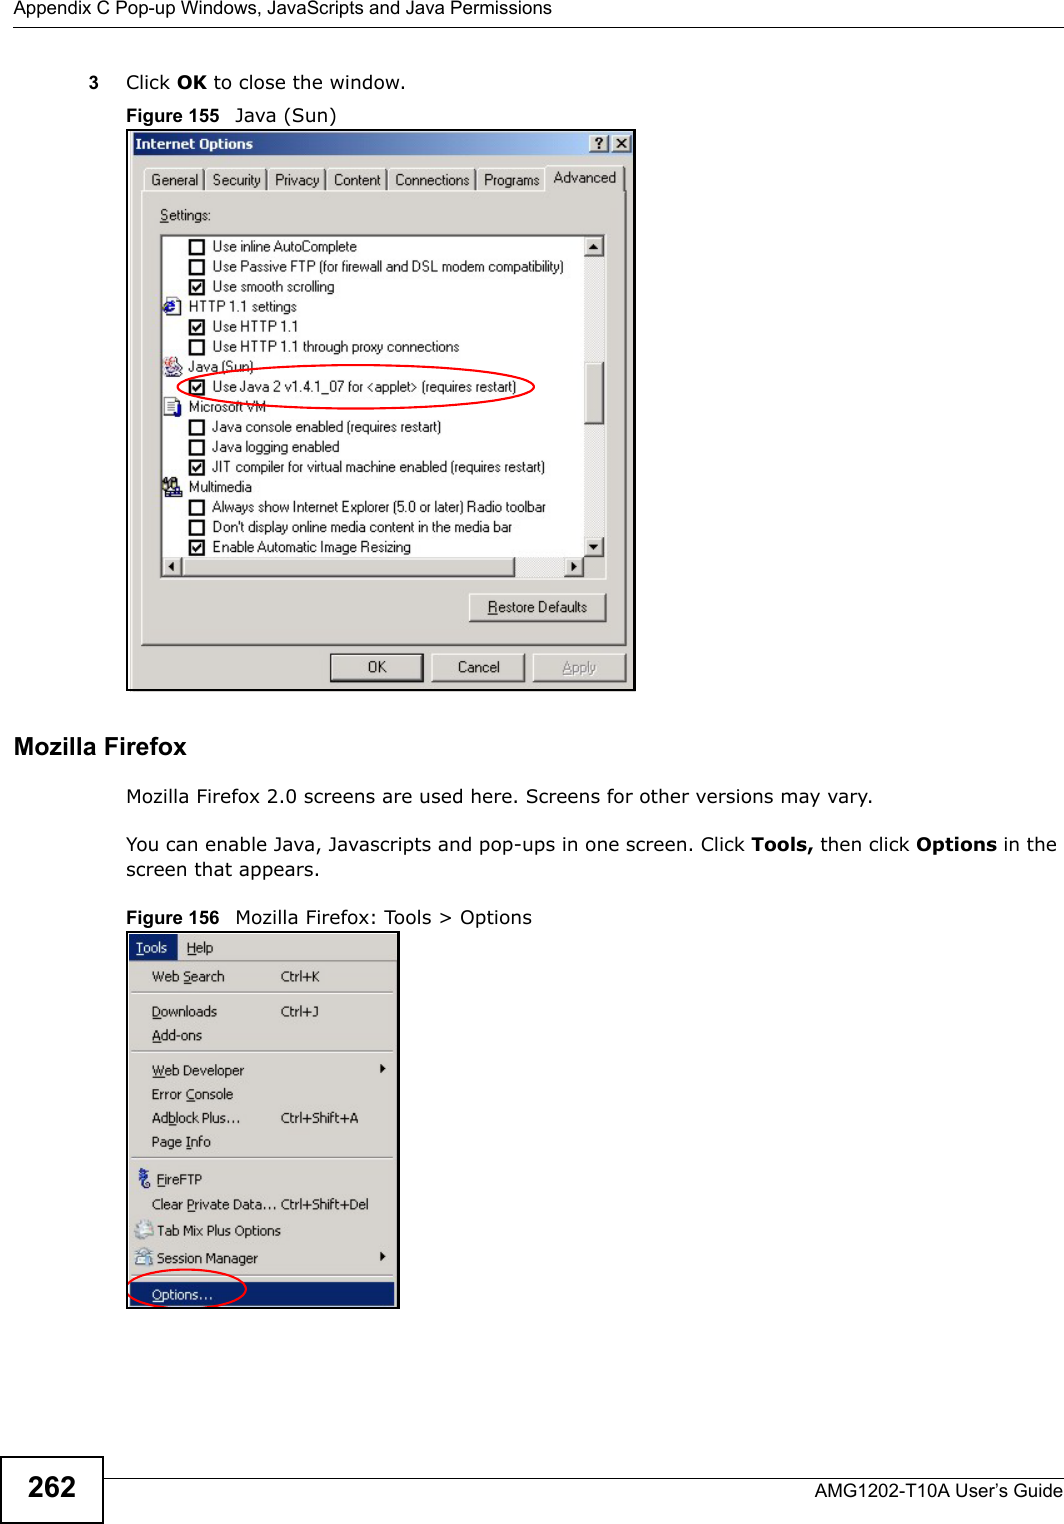 Appendix C Pop-up Windows, JavaScripts and Java PermissionsAMG1202-T10A User’s Guide2623Click OK to close the window.Figure 155   Java (Sun)Mozilla FirefoxMozilla Firefox 2.0 screens are used here. Screens for other versions may vary. You can enable Java, Javascripts and pop-ups in one screen. Click Tools, then click Options in the screen that appears.Figure 156   Mozilla Firefox: Tools &gt; Options